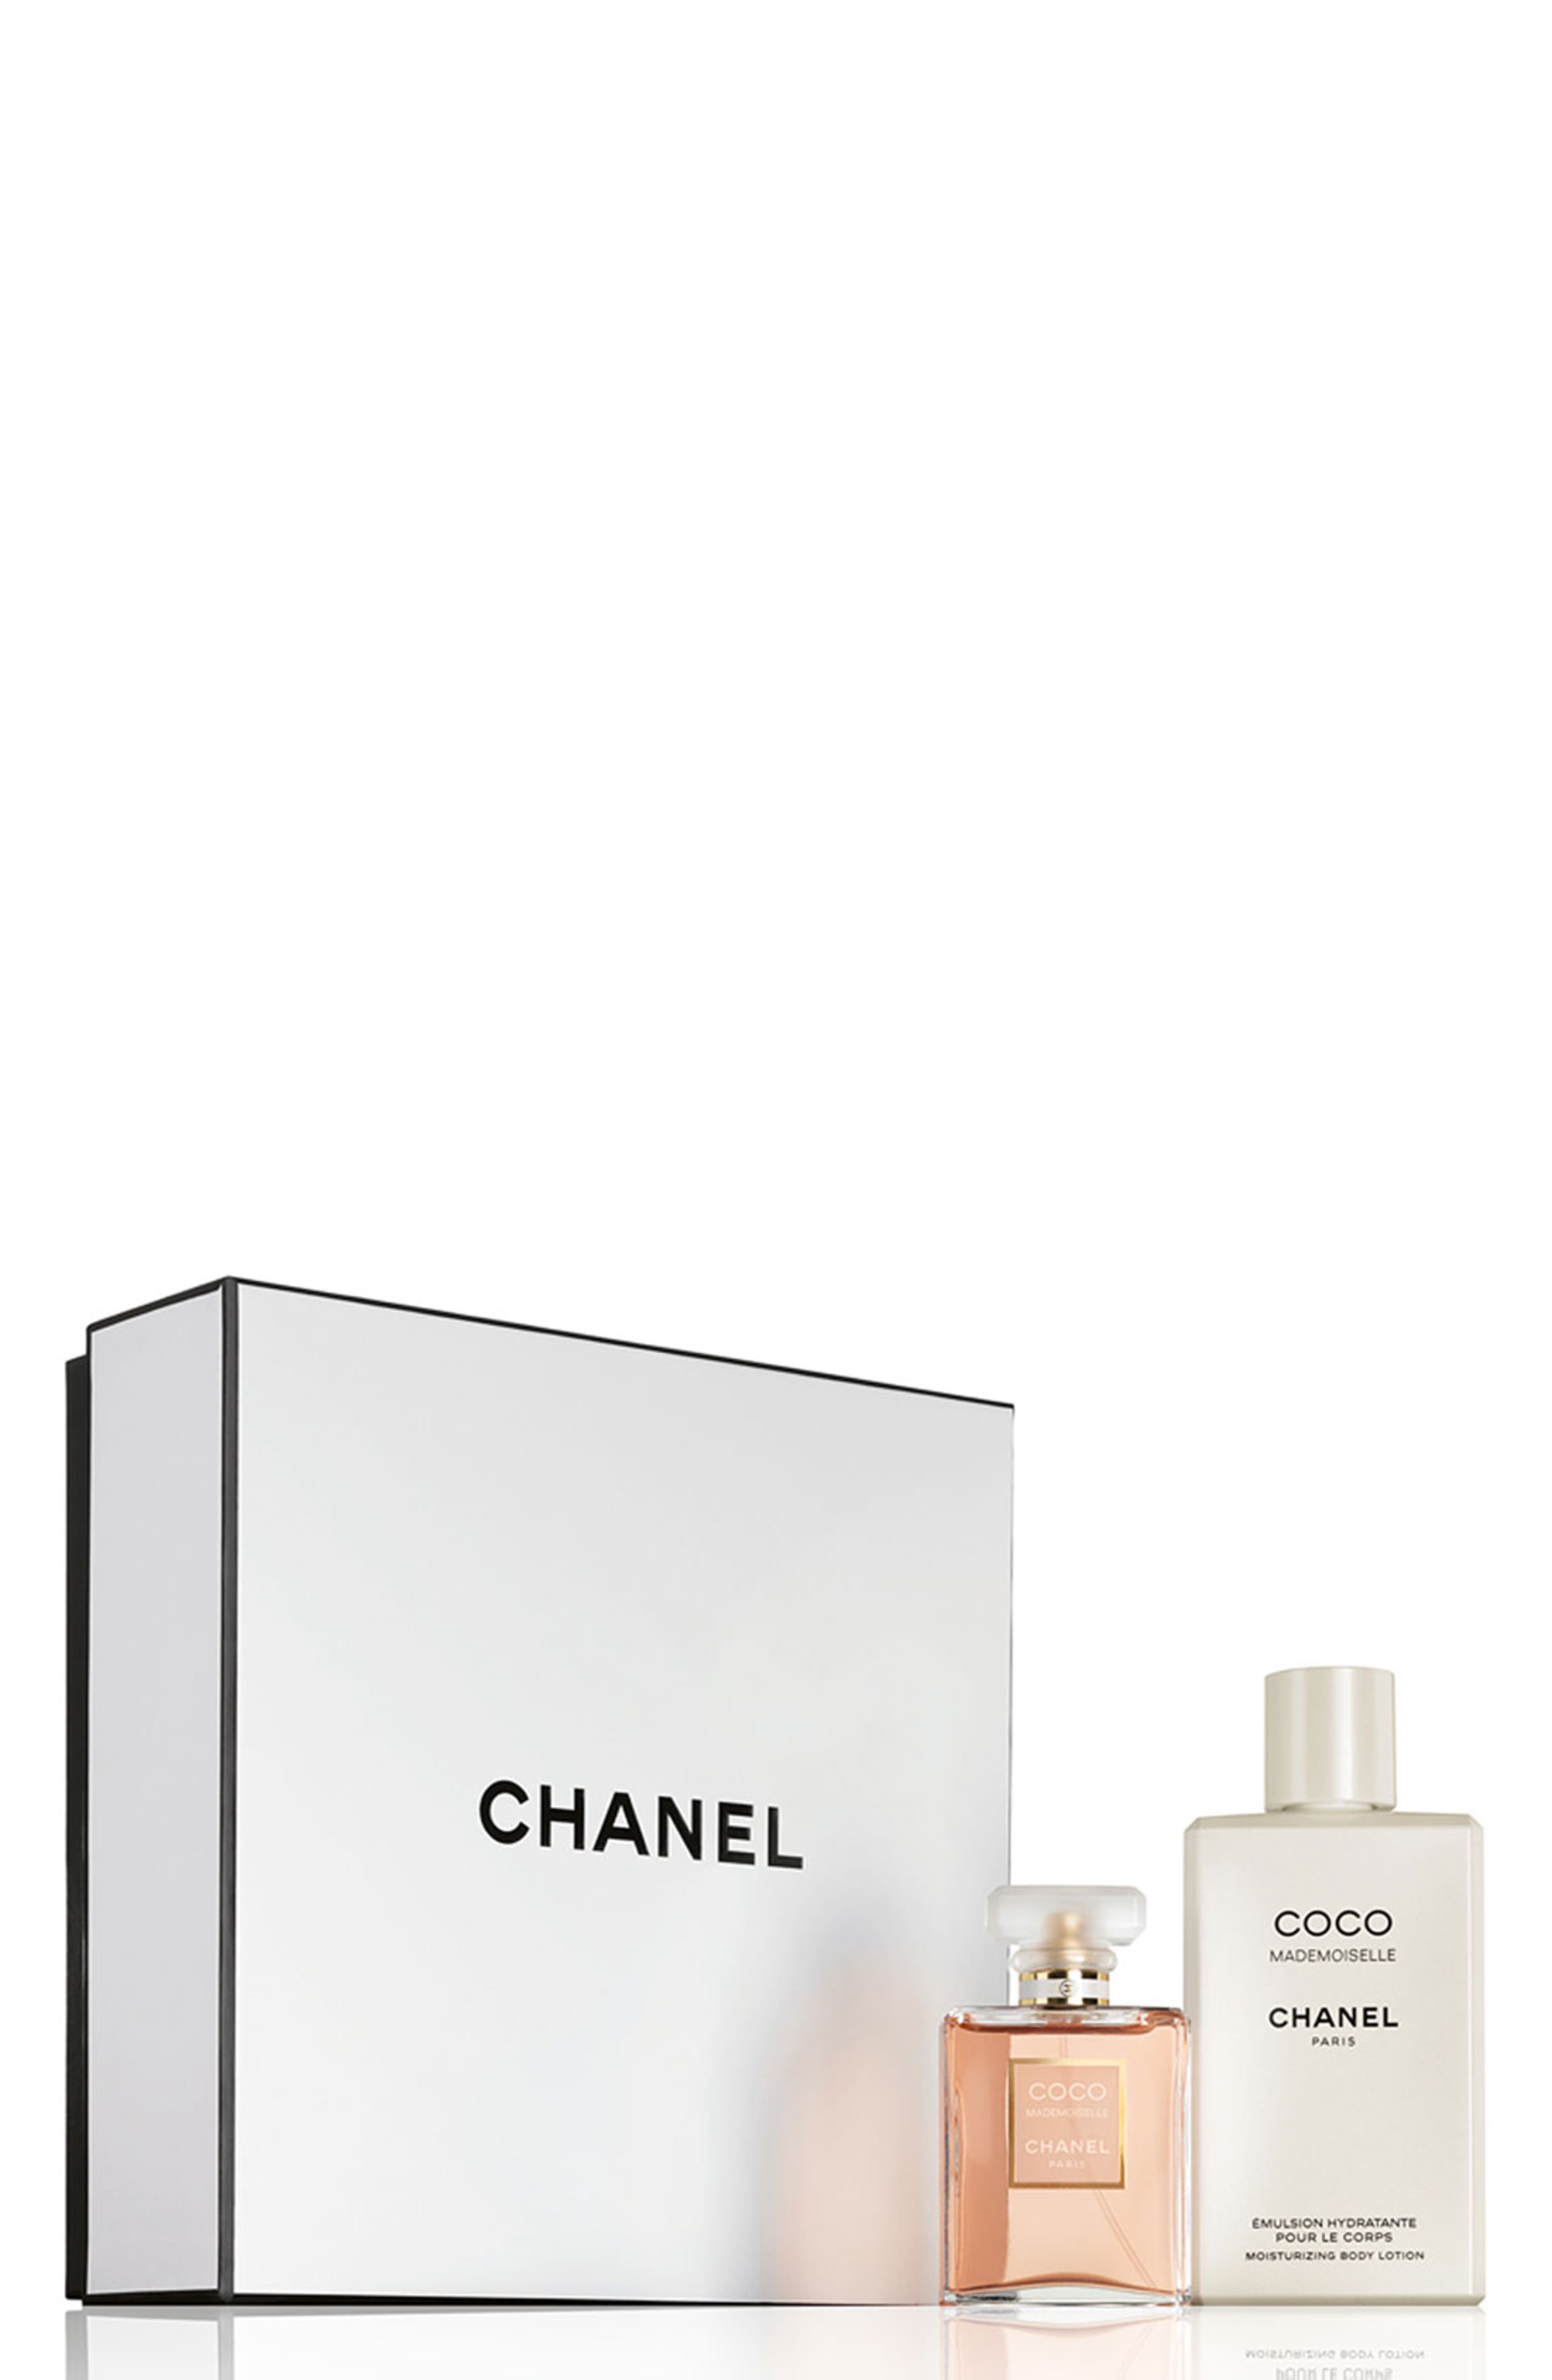 CHANEL COCO MADEMOISELLE DUO GIFT SET Nordstrom